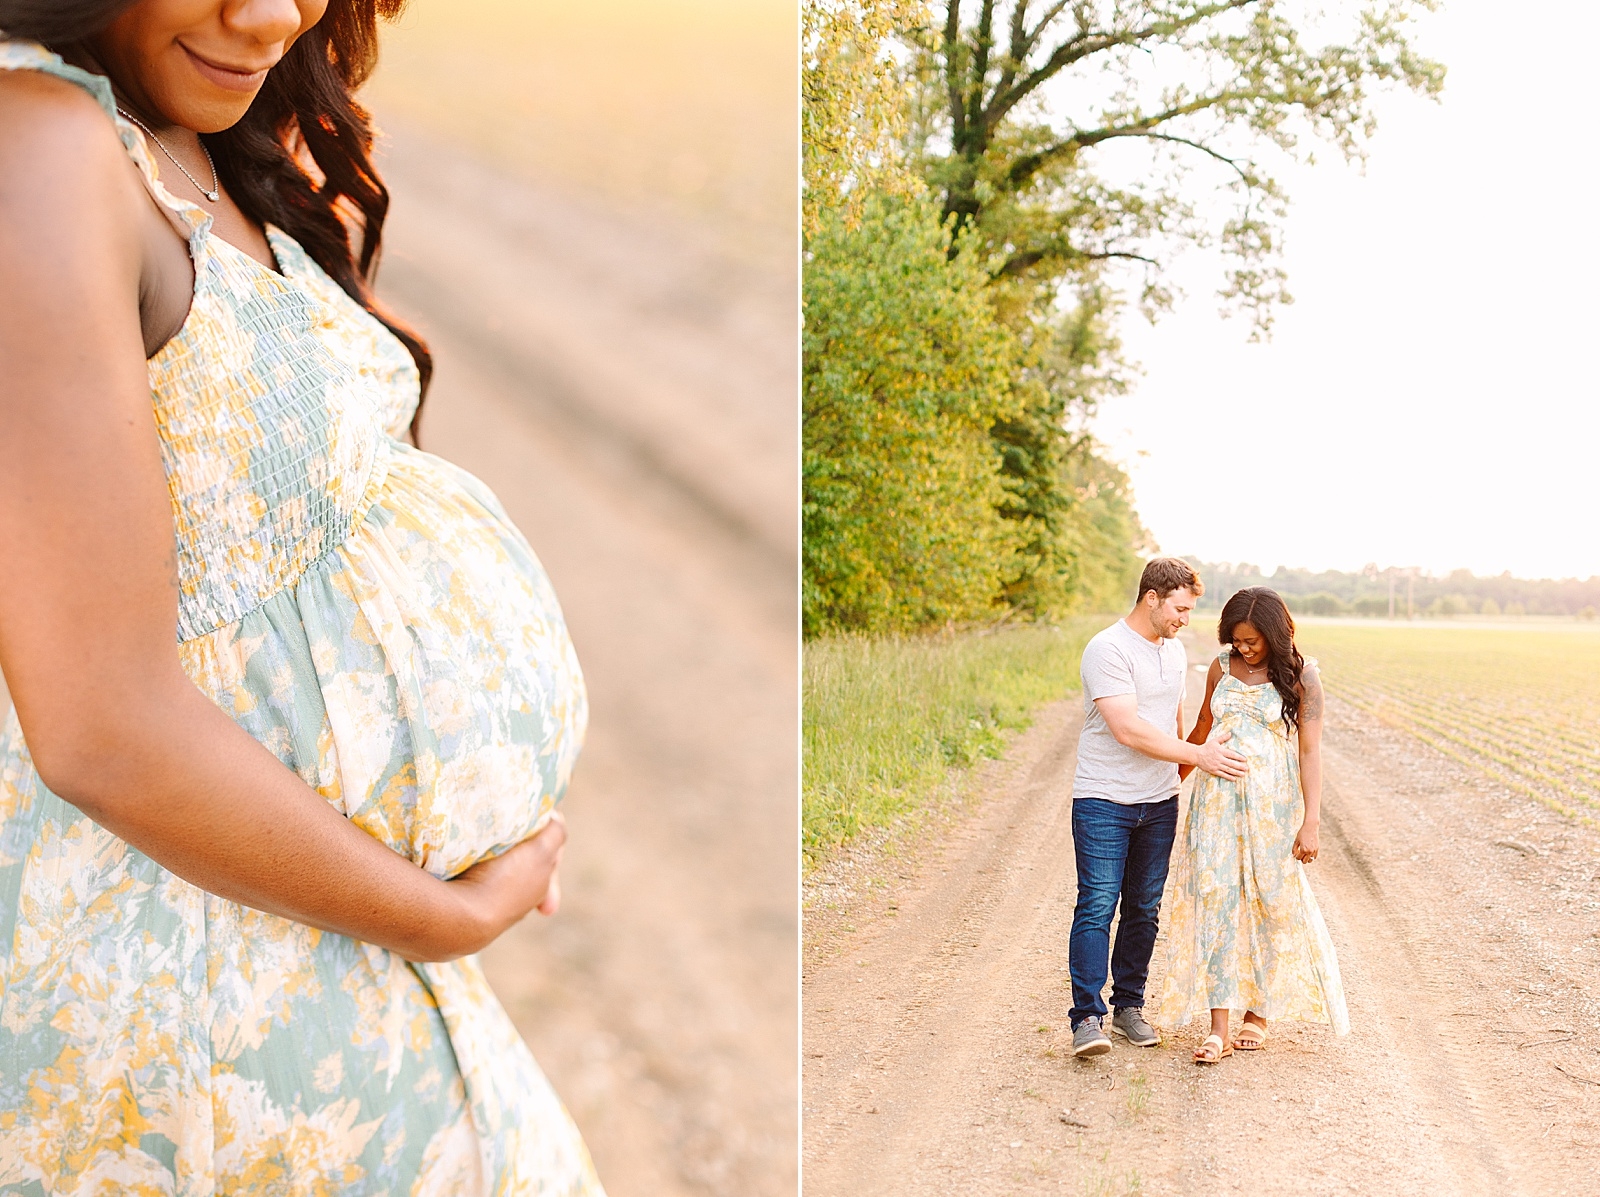 A Dreamy Rockport Indiana Maternity Session | Bret and Brandie Photography34.jpg